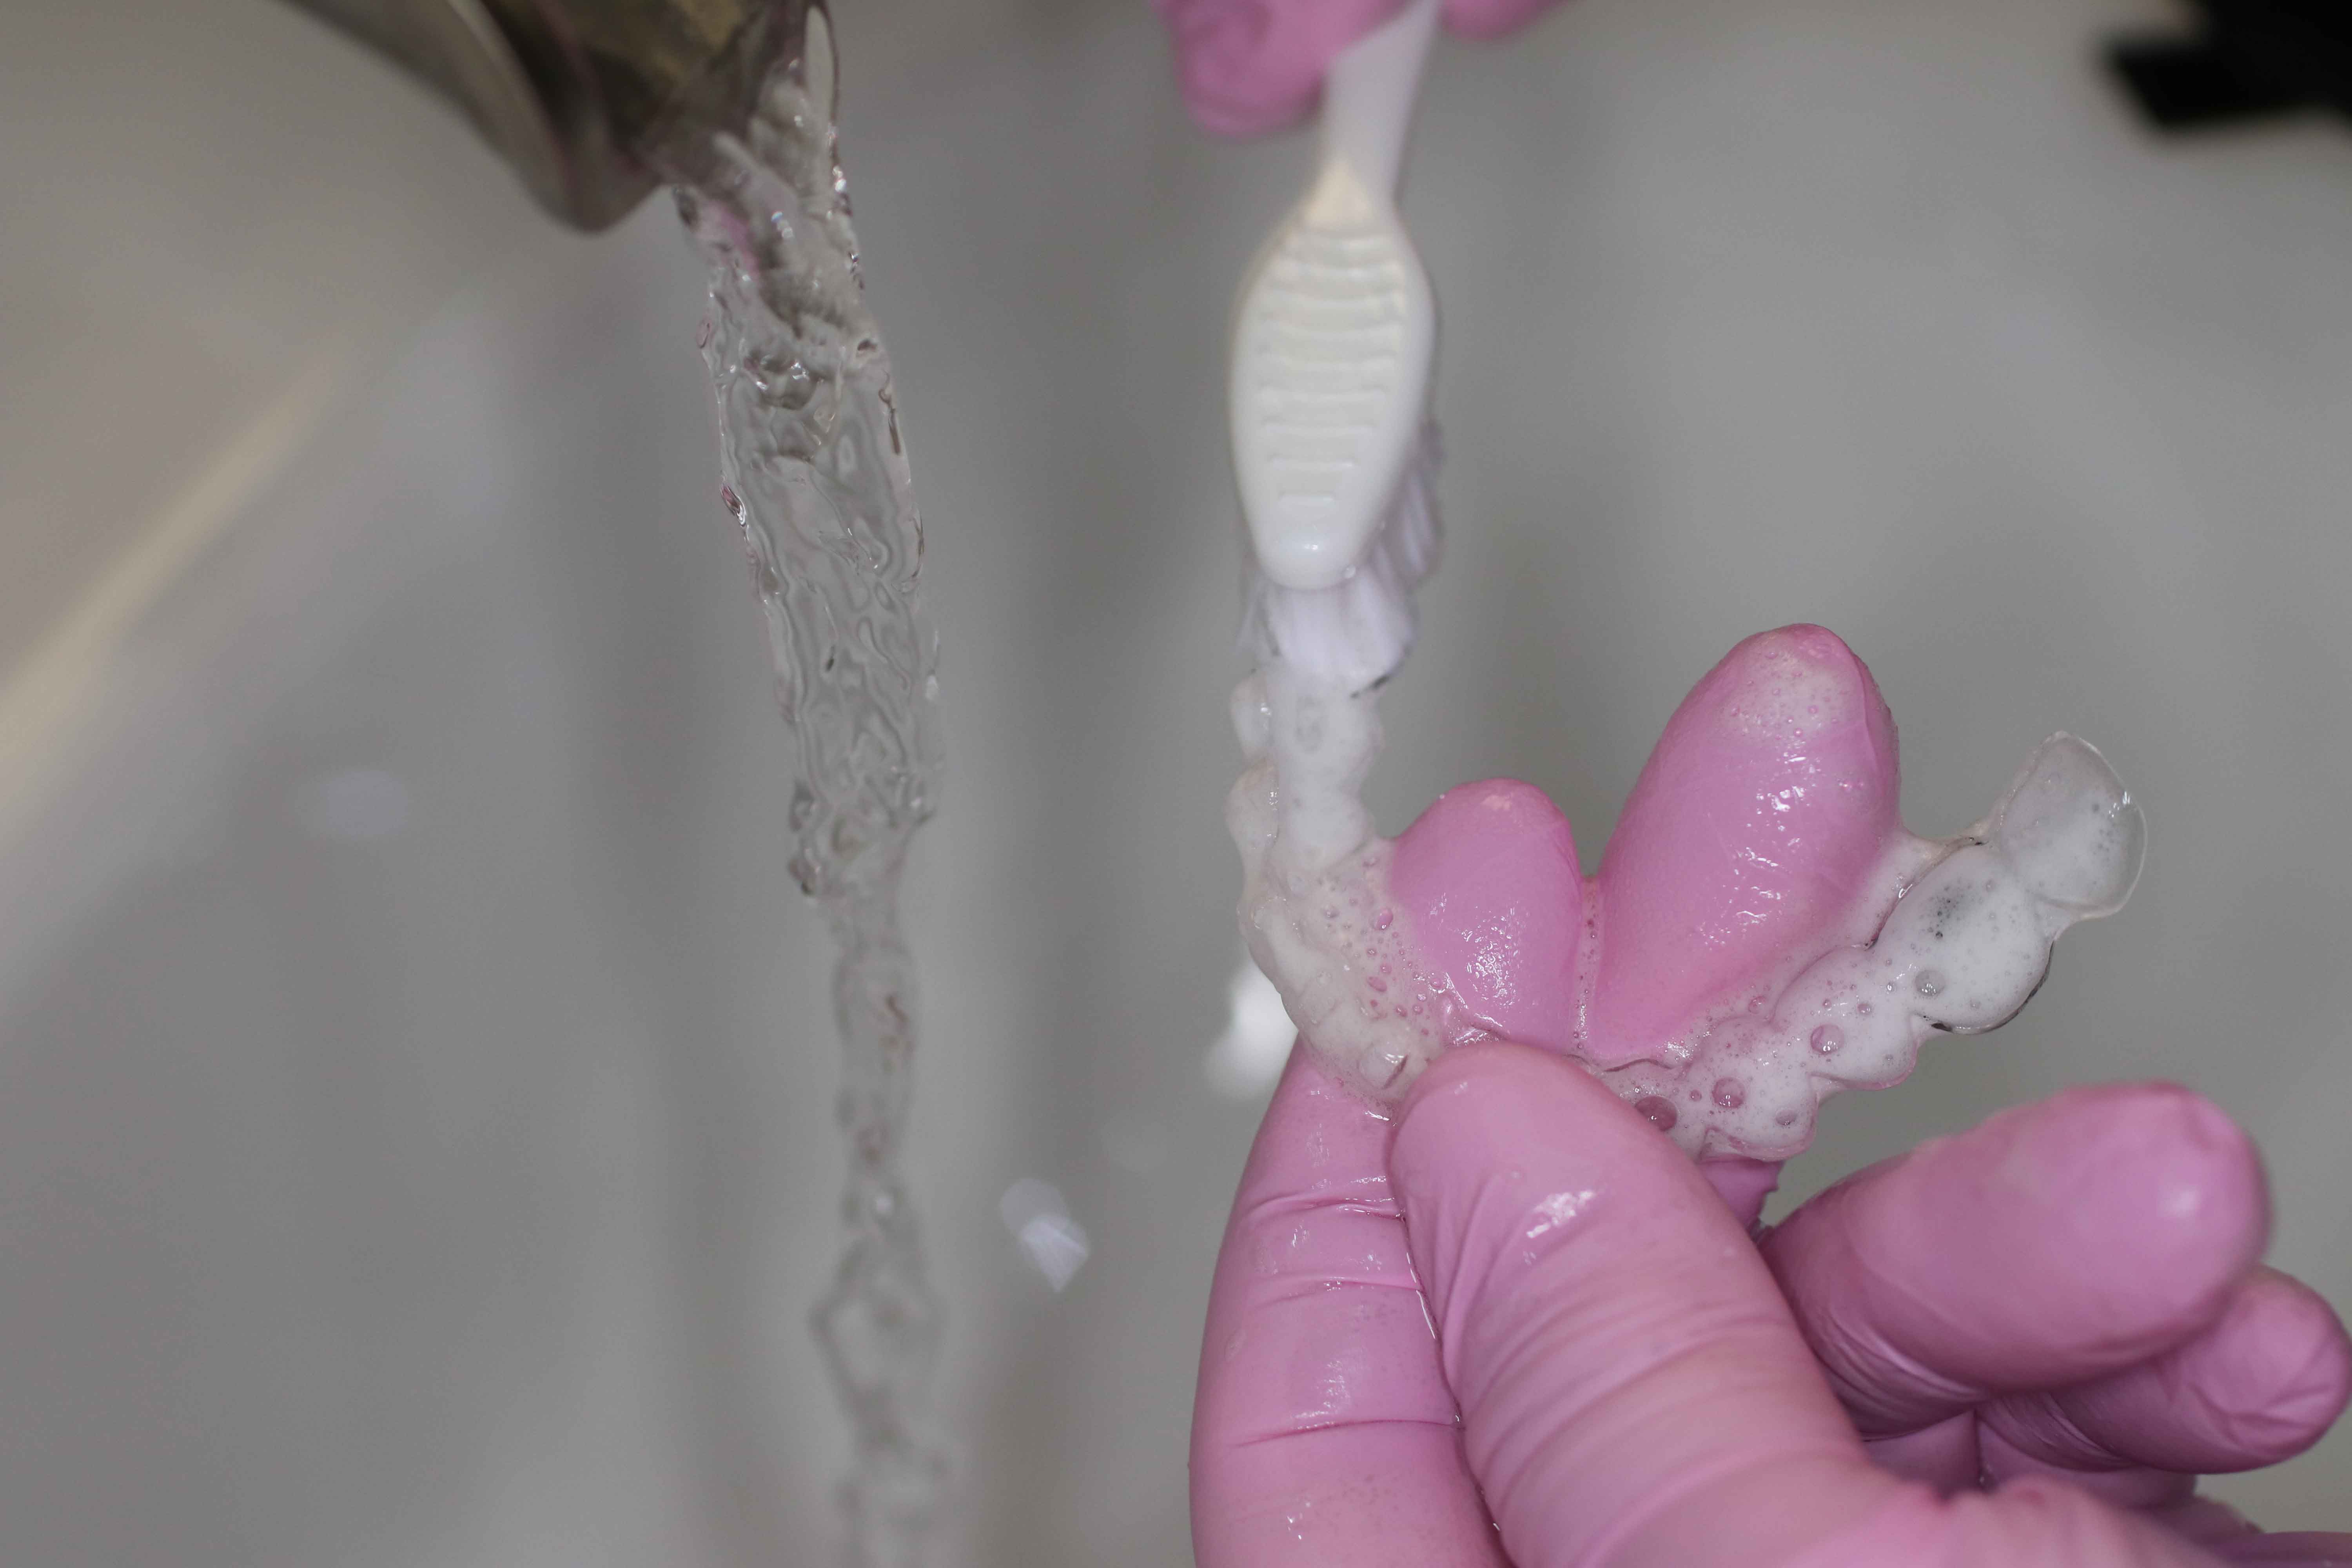 Brushing & Cleaning Invisalign Aligners